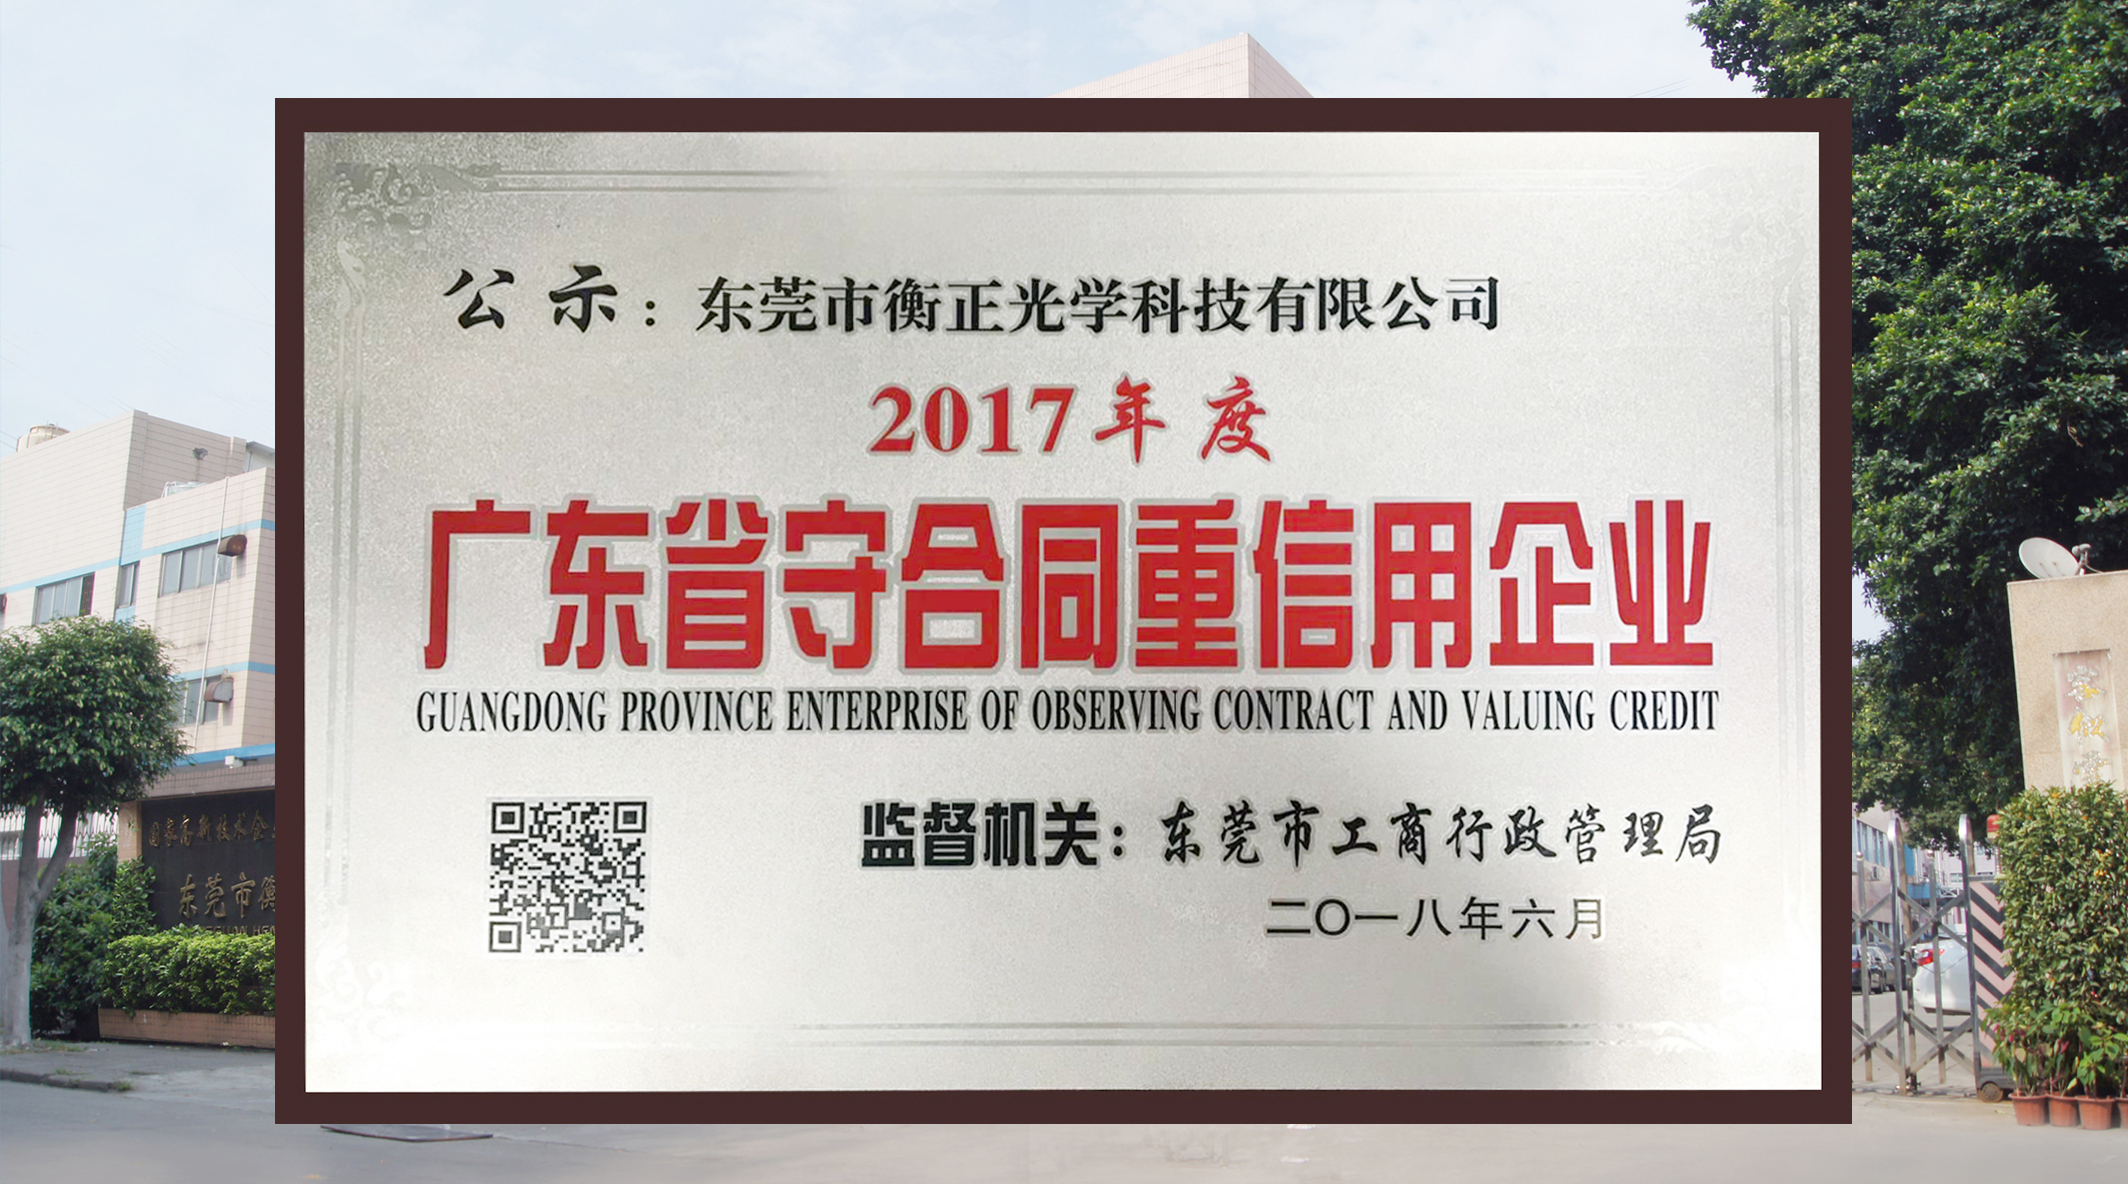 Dongguan Hengzheng Optical Technology Co., Ltd. won the title of "2017 Guangdong contract abiding and trustworthy enterprise" and obtained the honorary certificate.